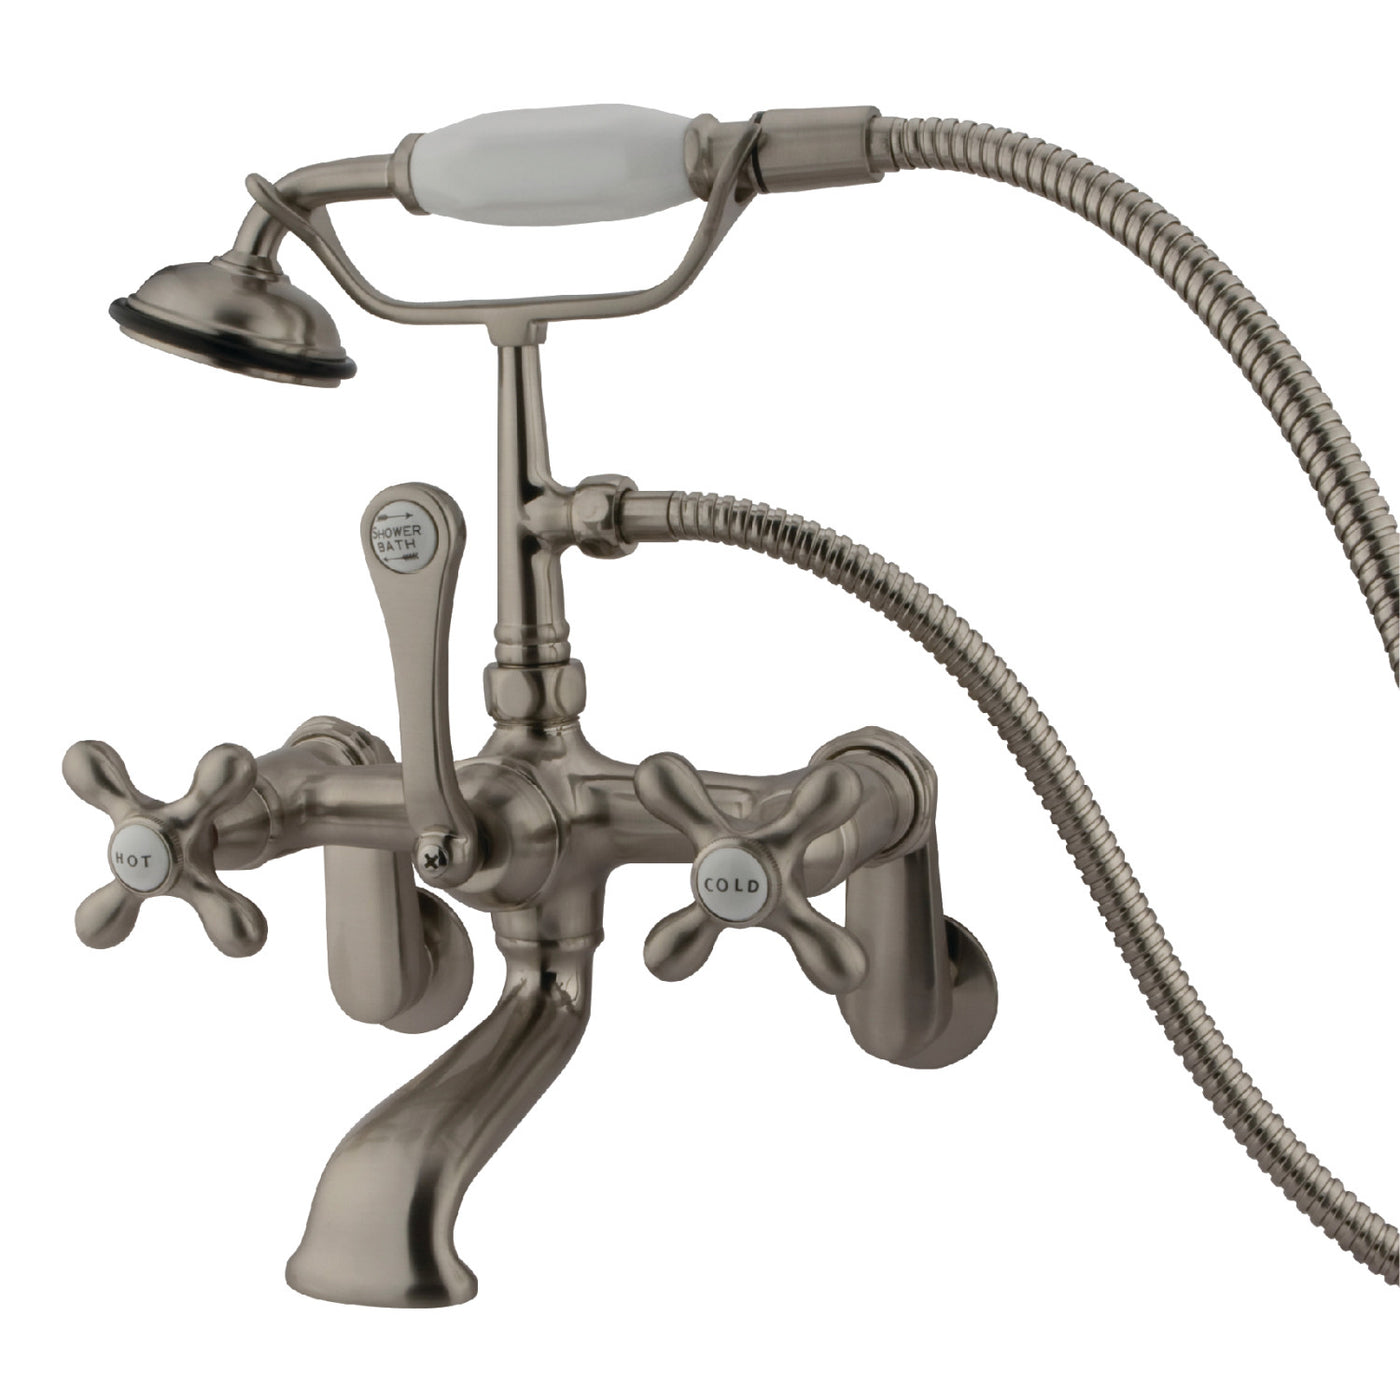 Elements of Design DT0518AX Adjustable Center Wall Mount Tub Faucet, Brushed Nickel